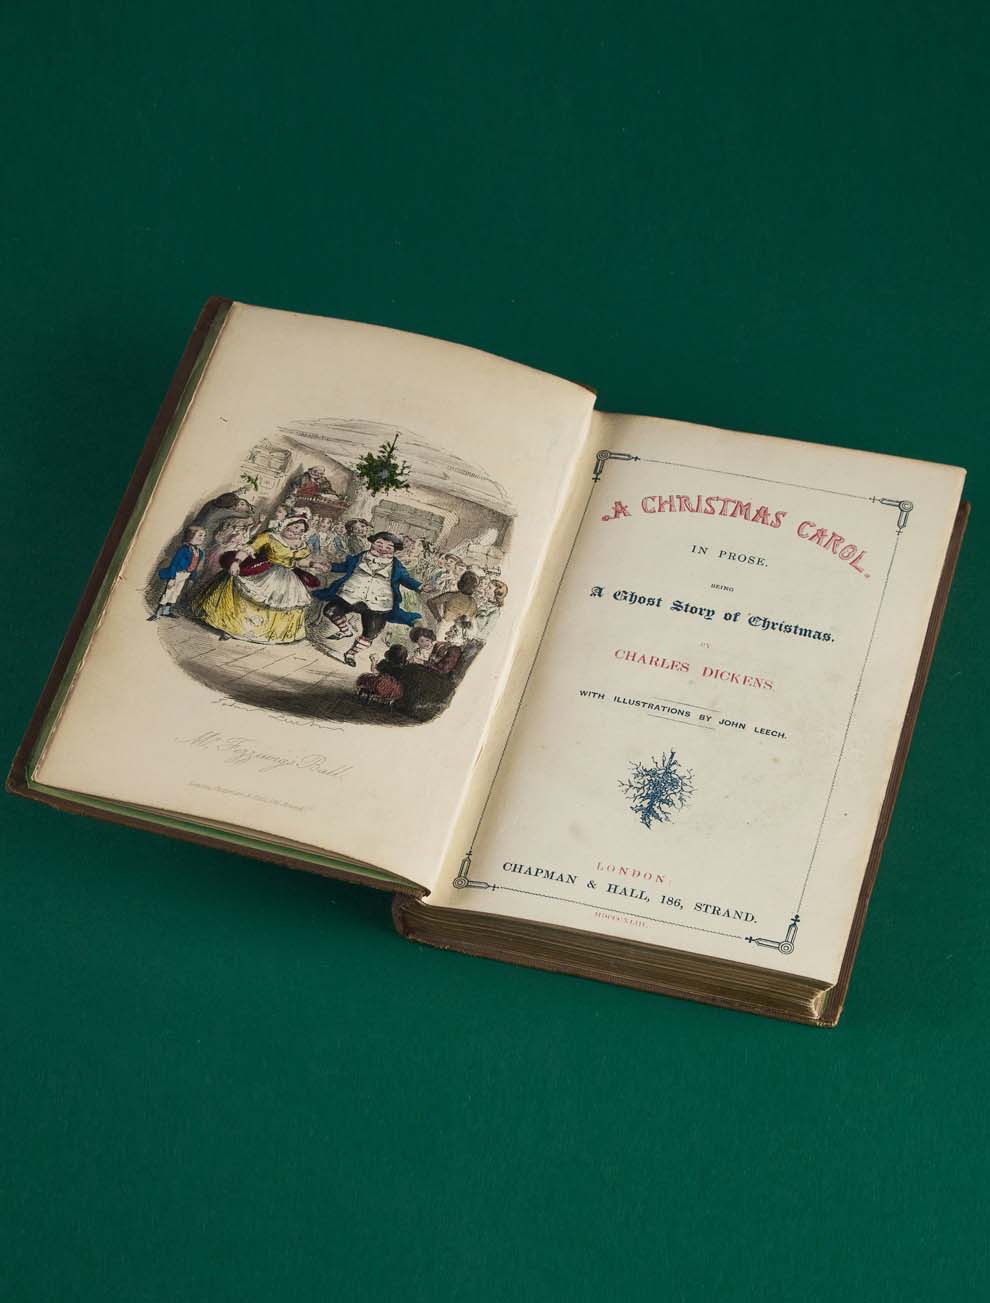 A First Edition of Charles Dickens' "A Christmas Carol"